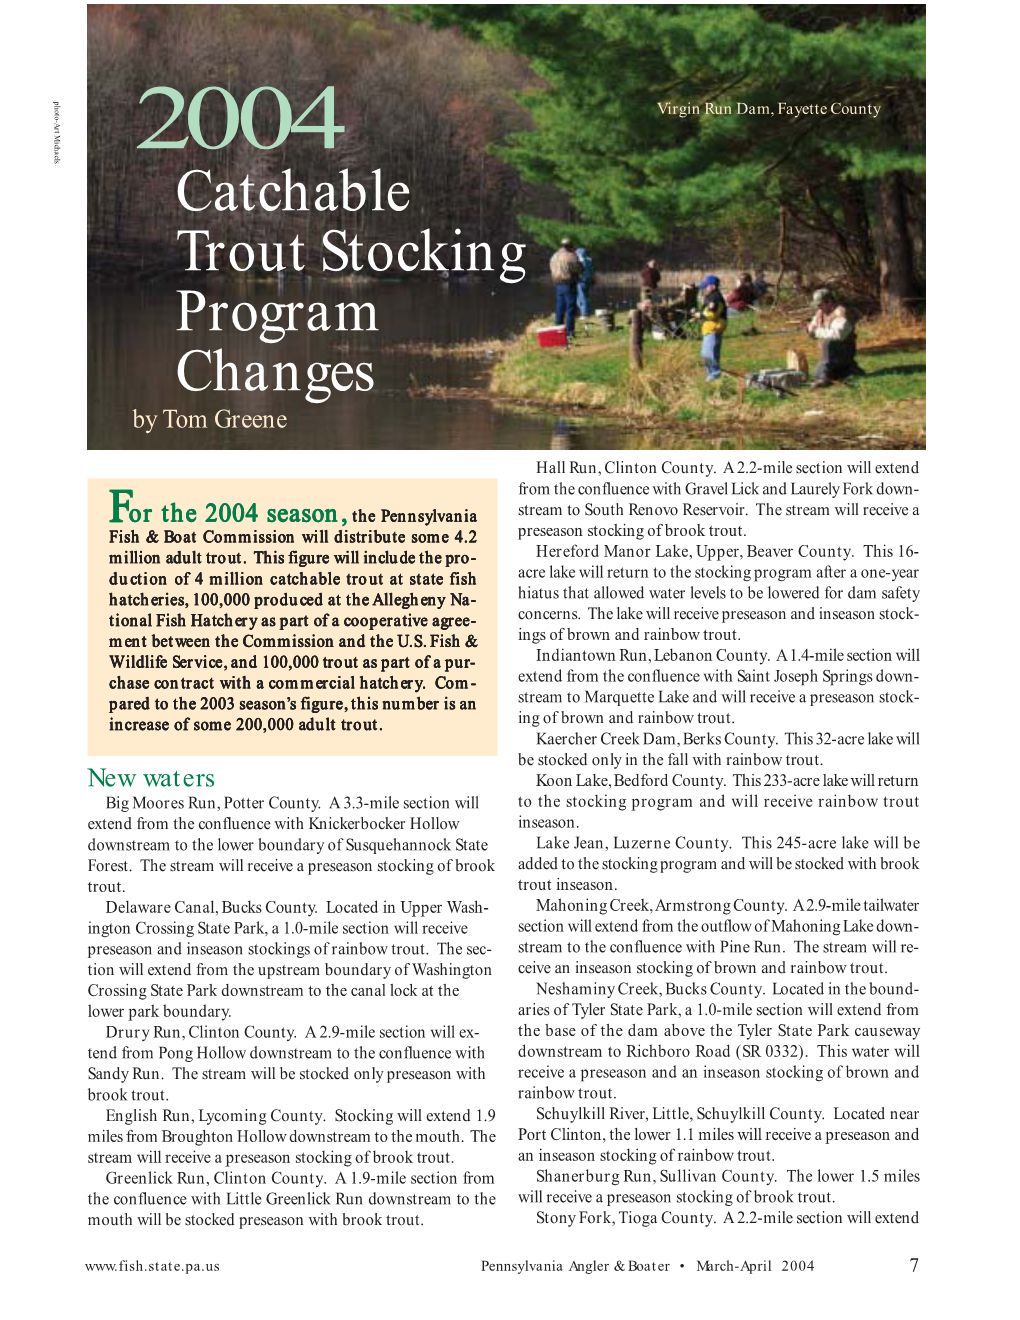 2004 Catchable Trout Stocking Program Changes by Tom Greene